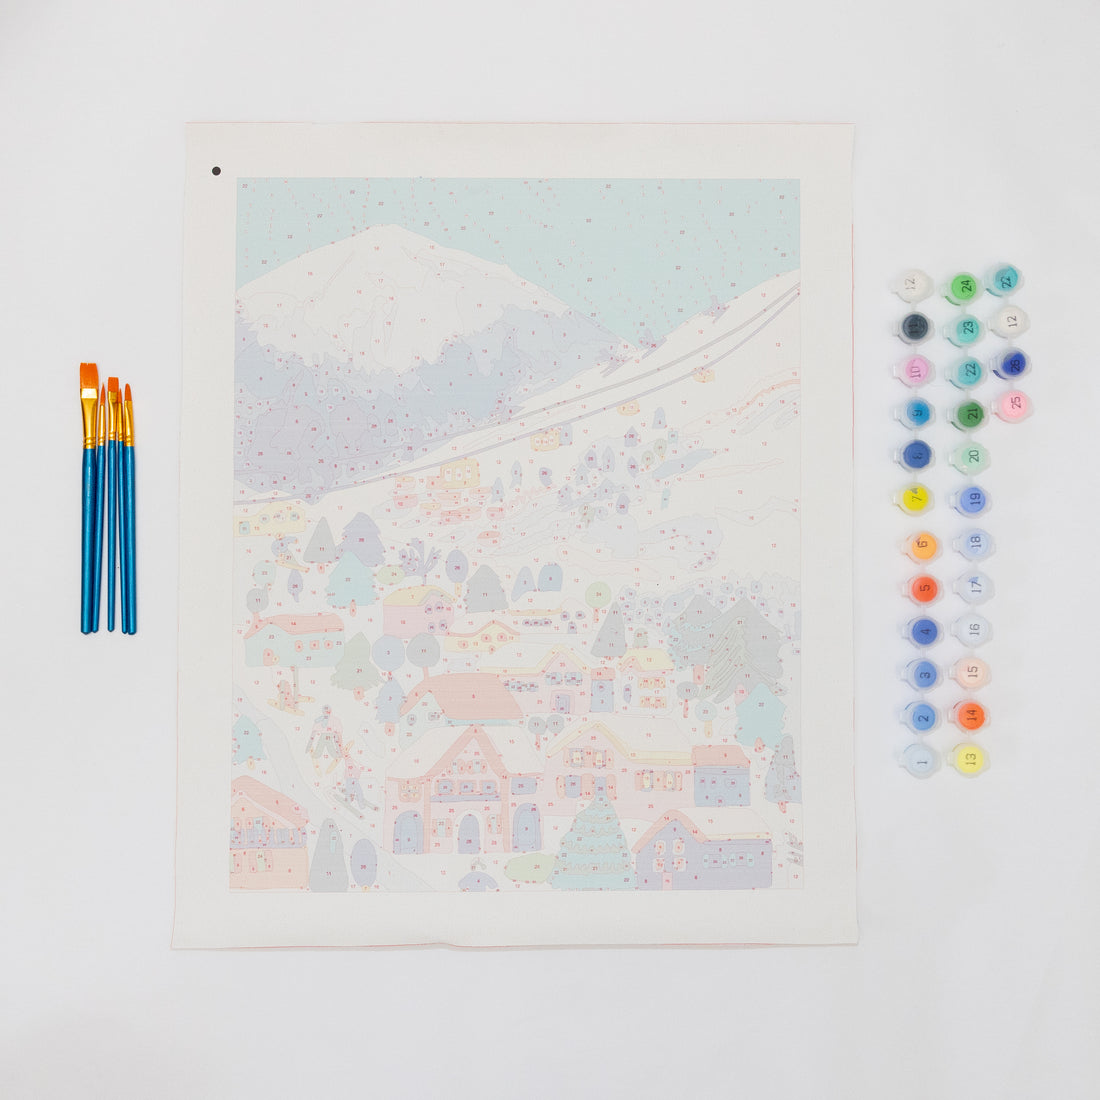 Retro Ski by Hebe Studio Paint by Numbers Deluxe